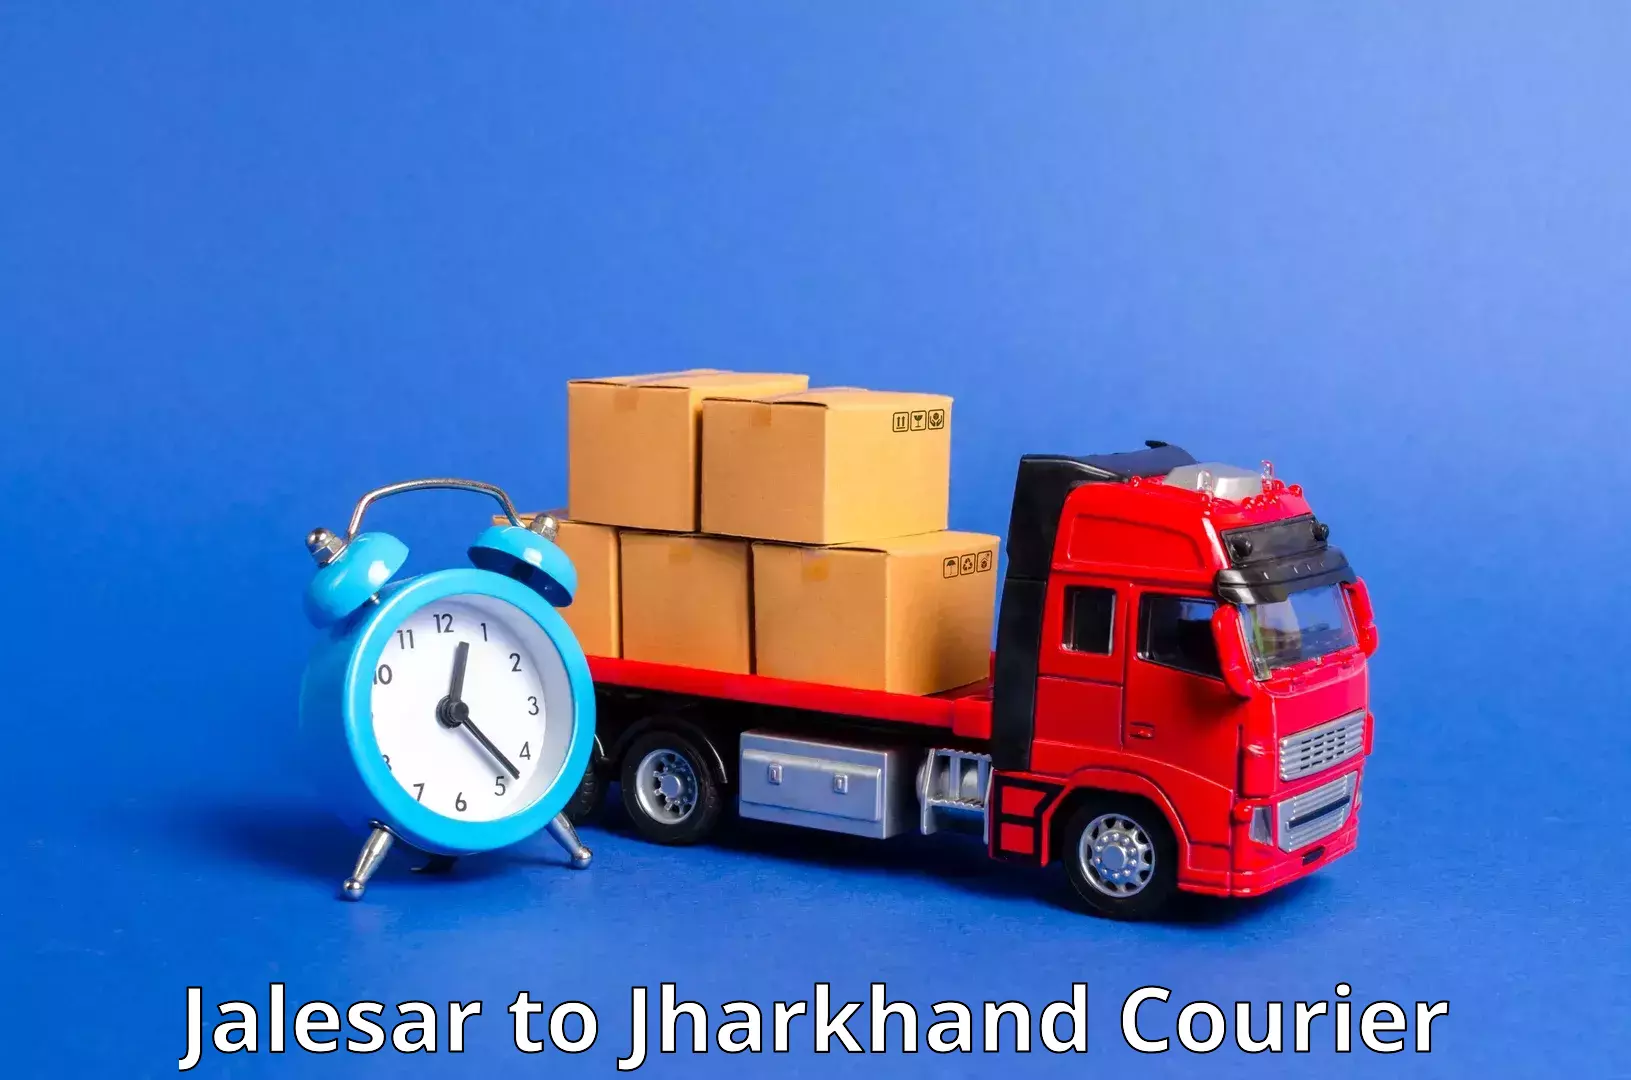 Nationwide courier service Jalesar to Jharkhand